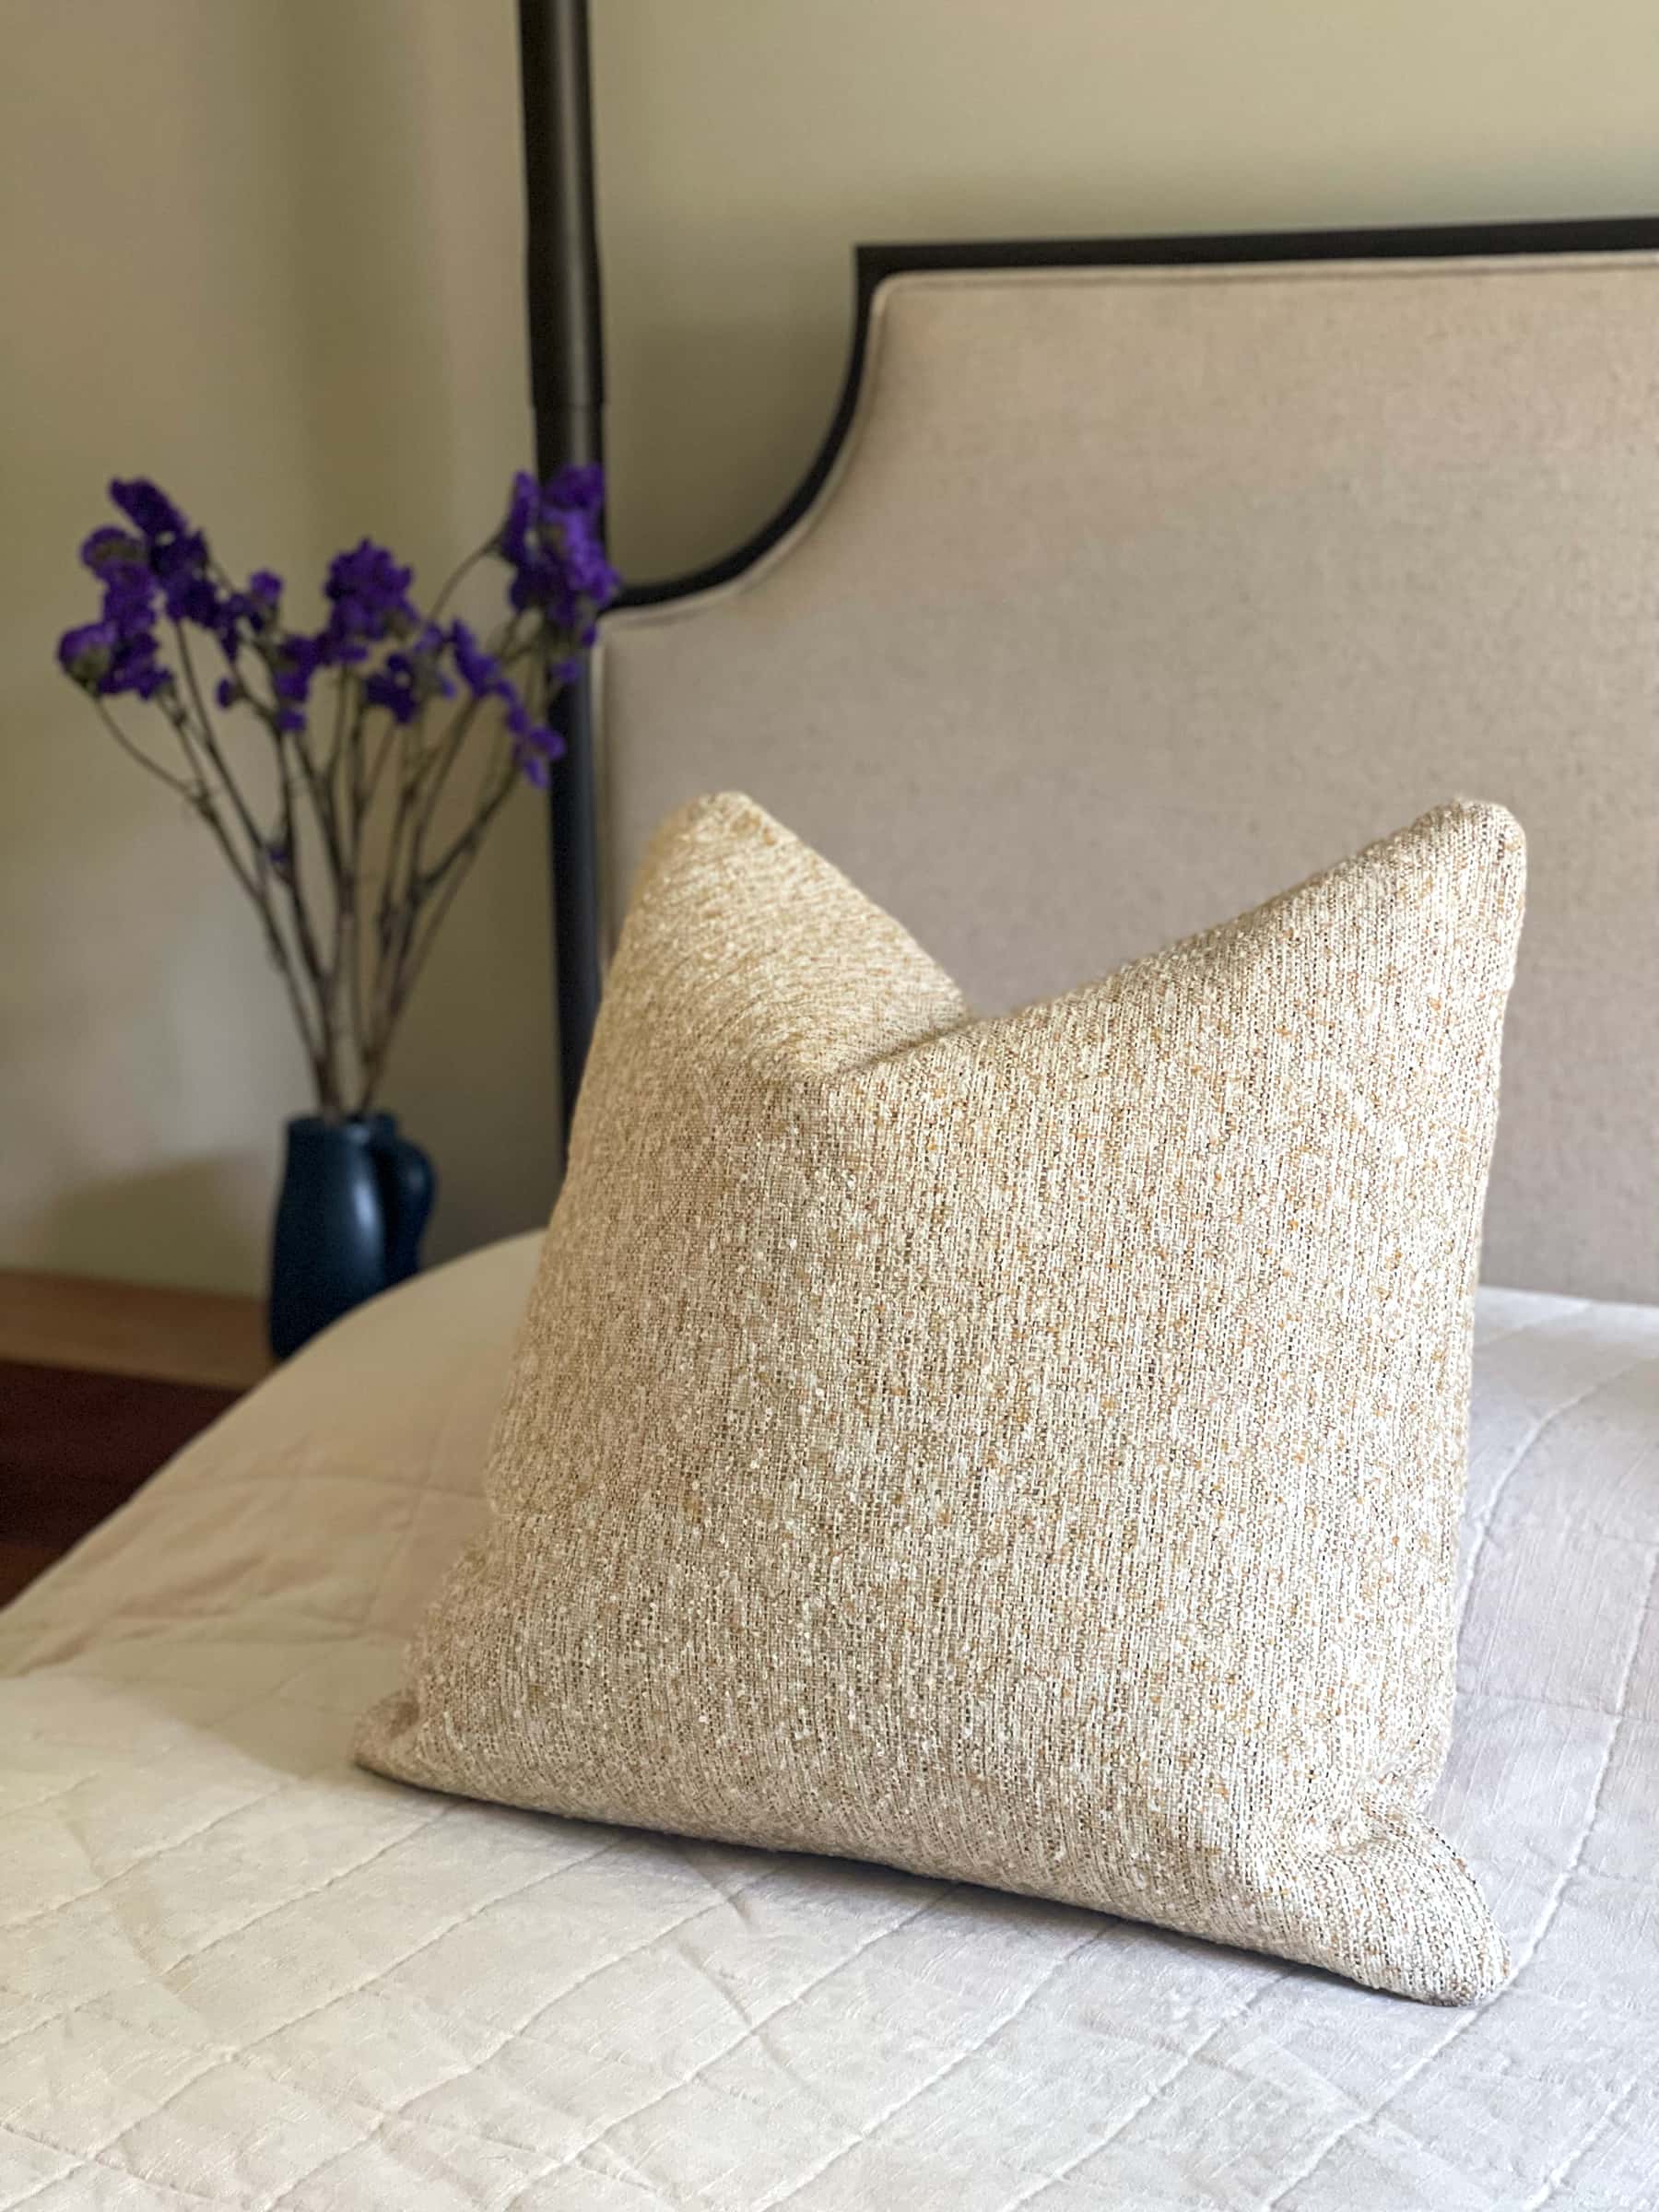 Boucle square pillow in pale yellow and thick fabric sitting in front of a black ceramic vase with delicate deep purple flowers